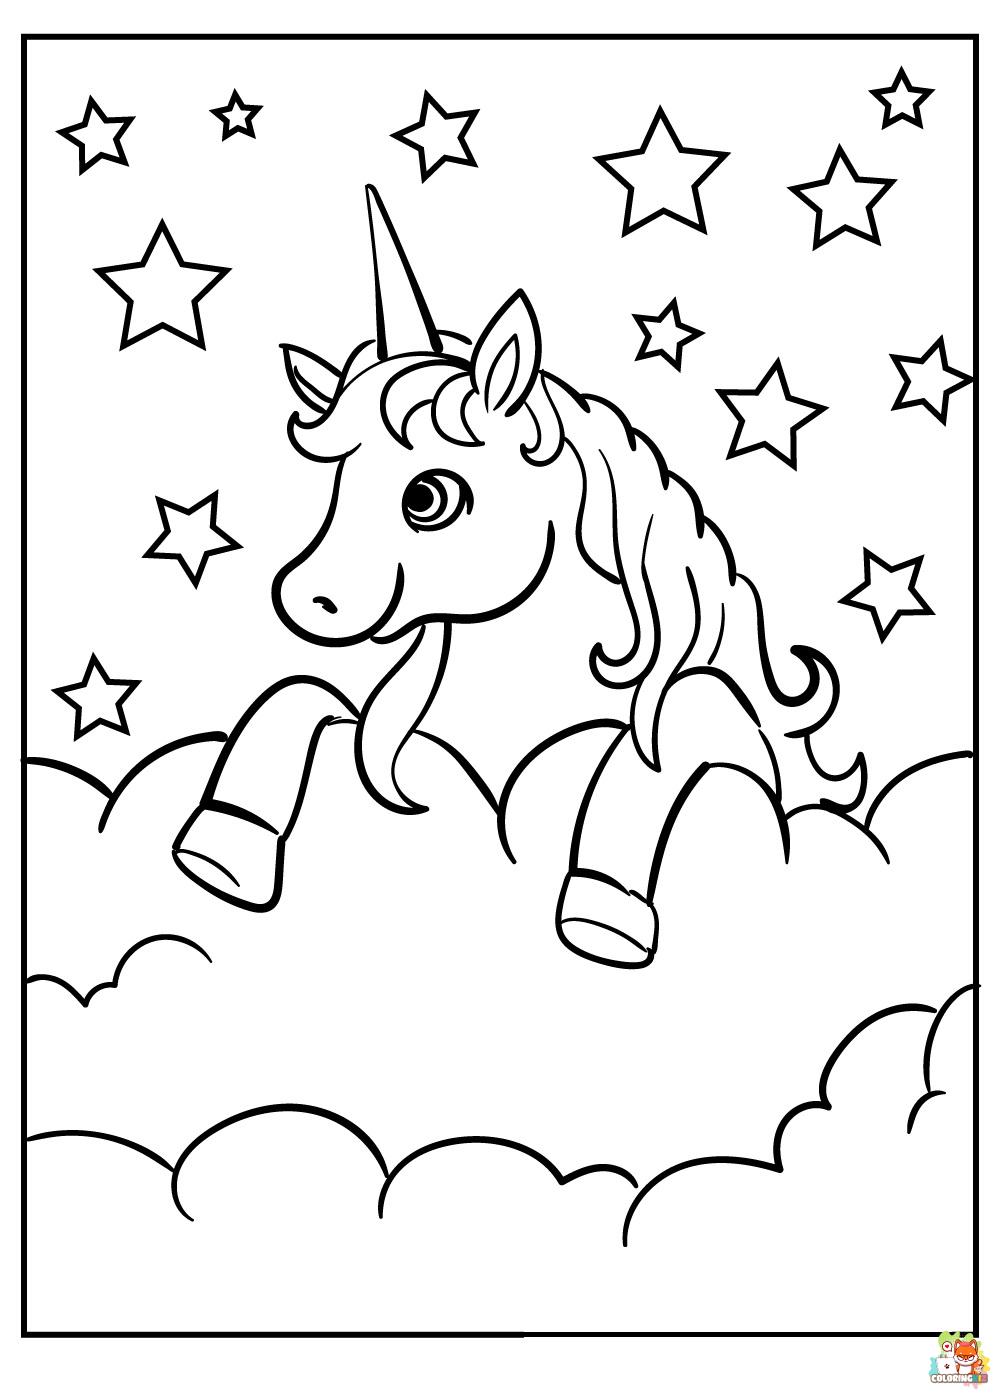 Unicorn Sleeping In The Cloud Coloring Pages 9